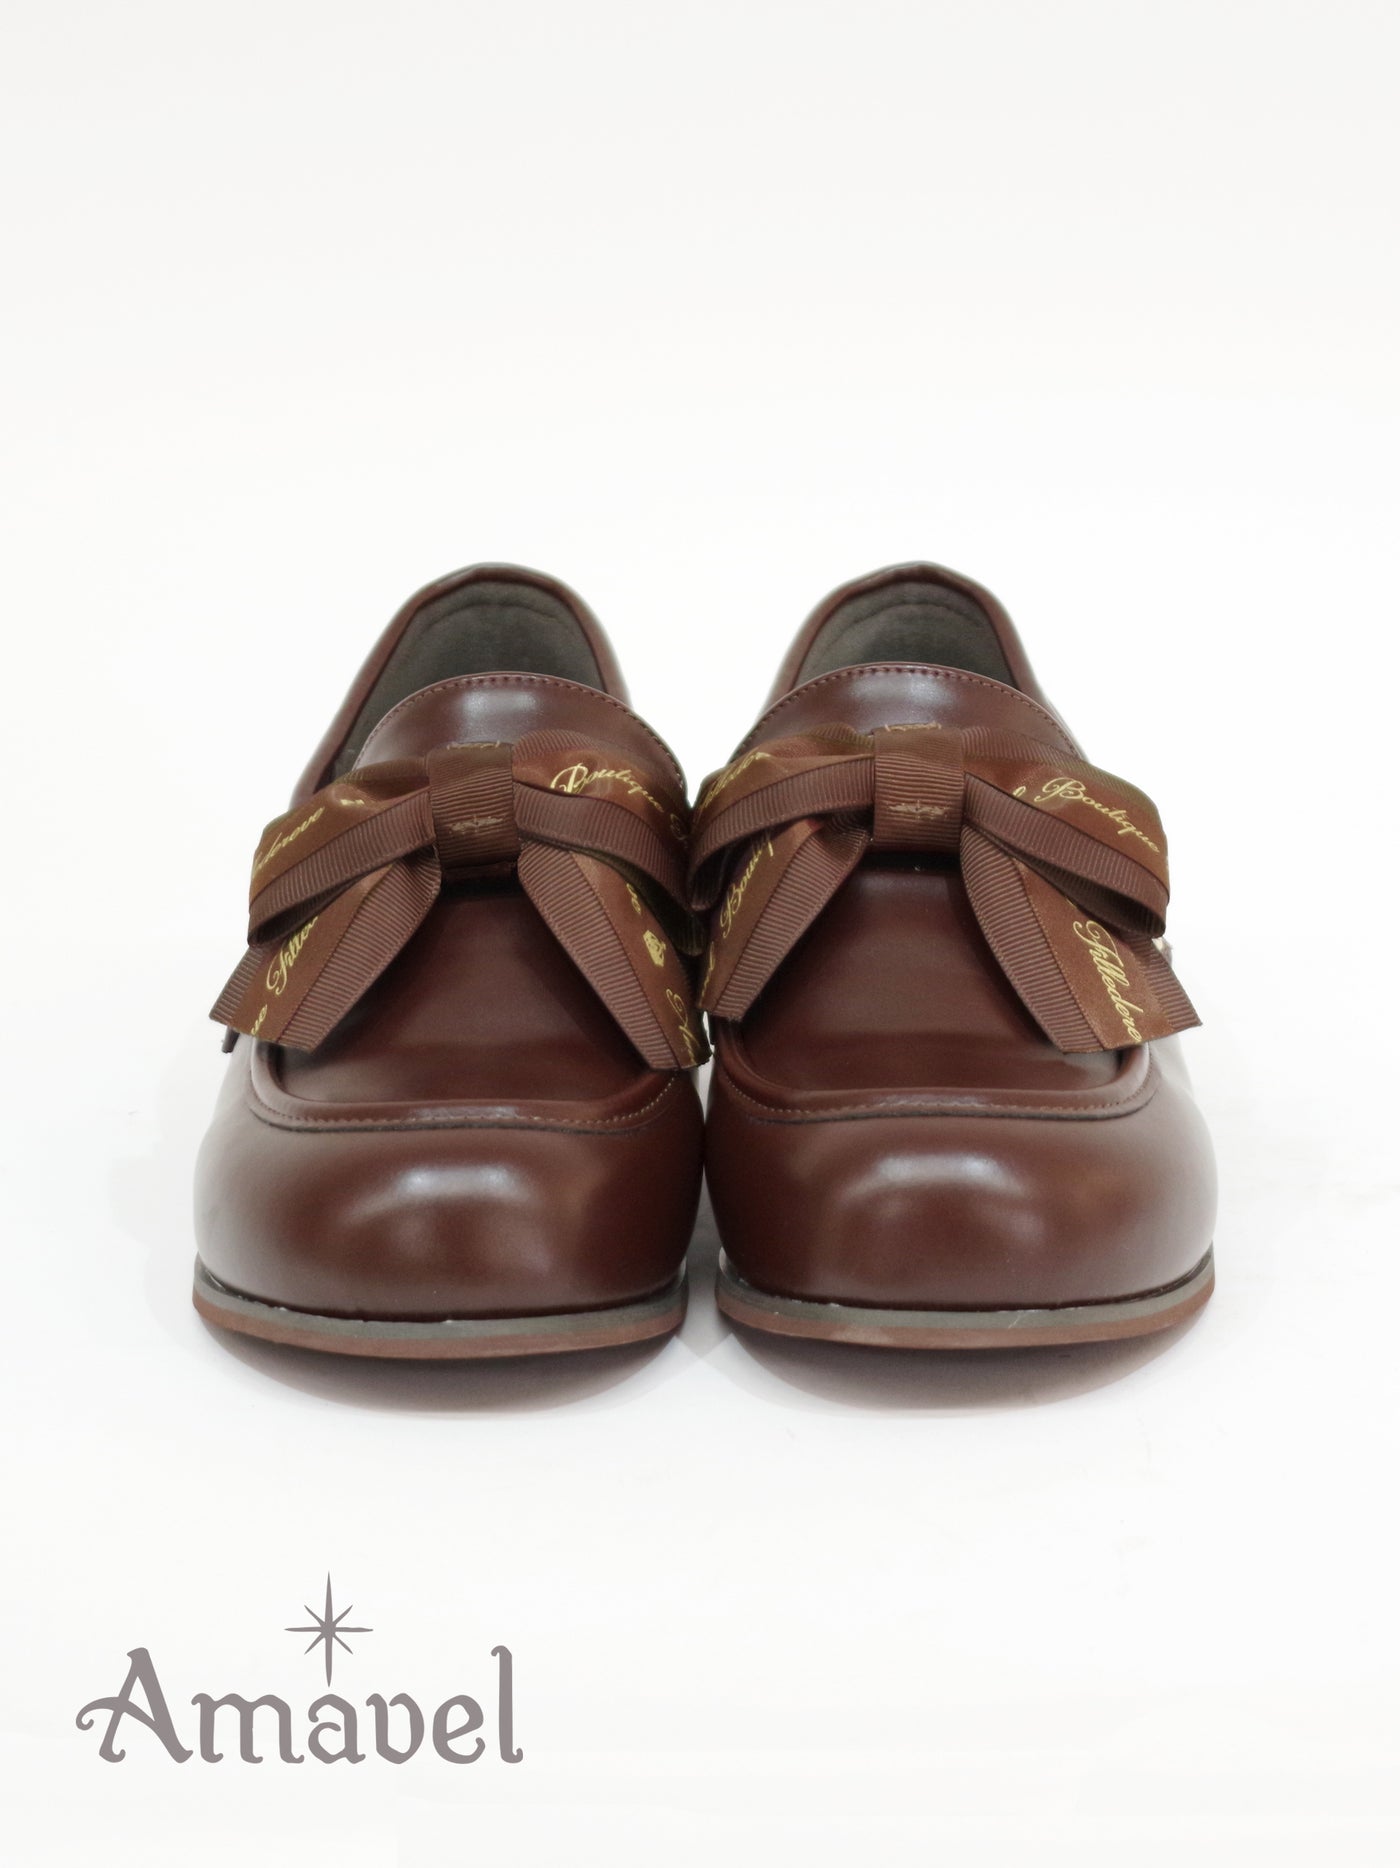 Chocolat Chat Delicious loafer pumps